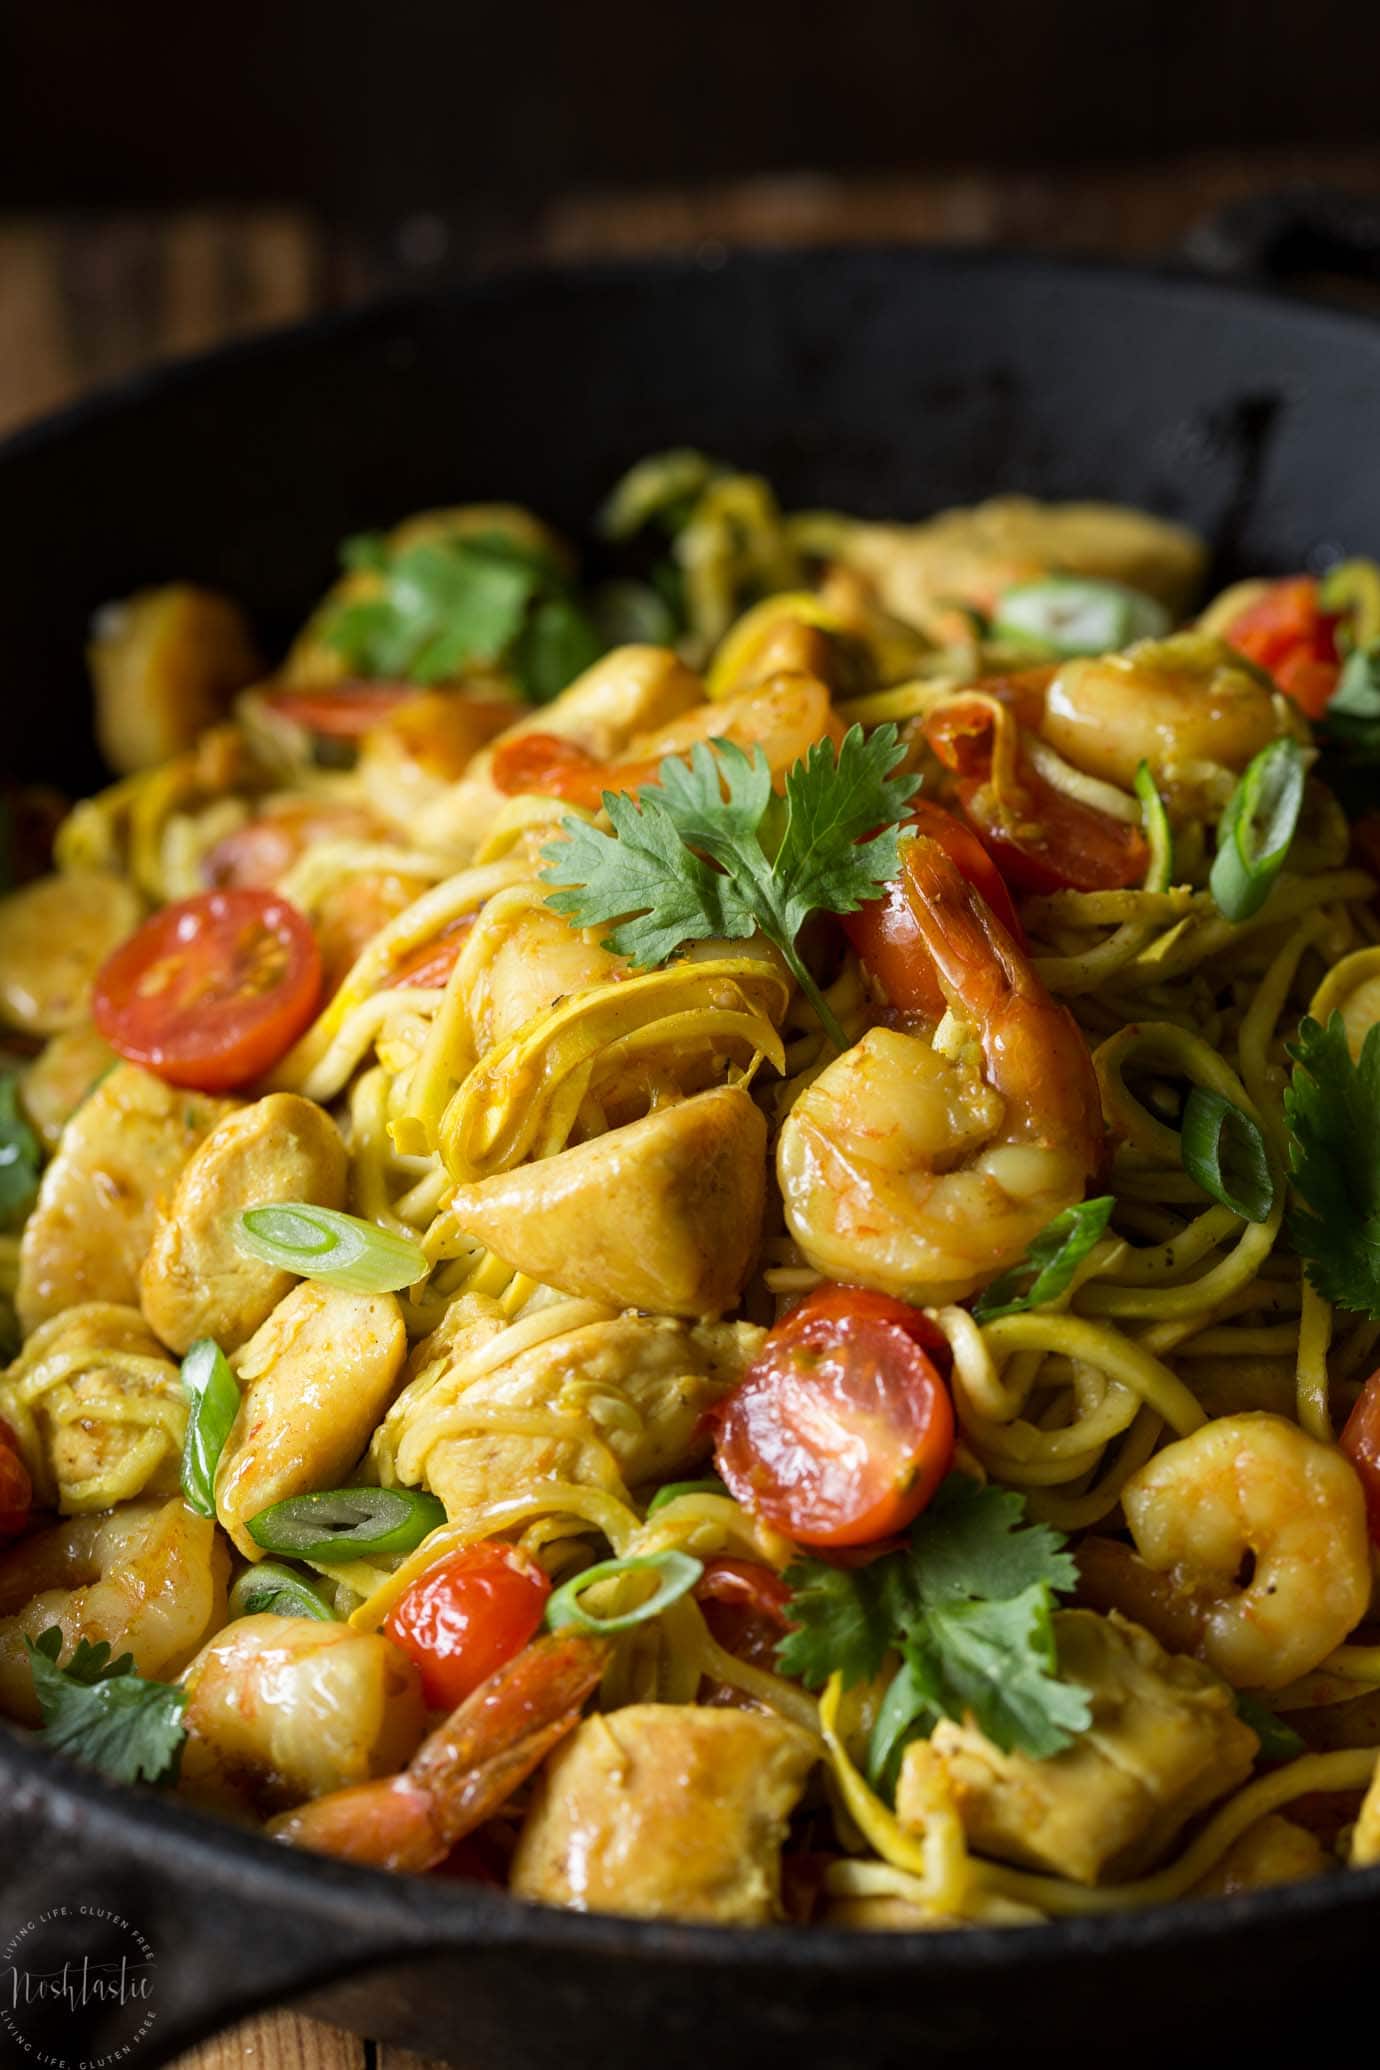 Paleo Singapore Noodles, made with zucchini noodles - zoodles , shrimp, chicken and tasty mild curry flavored sauce with added turmeric! This Singapore street noodles recipe is packed with authentic flavors, it is Gluten free, healthy, low carb with Whole30. If you're looking for a PF Chang's Street Noodles recipe to make at home, this is it!